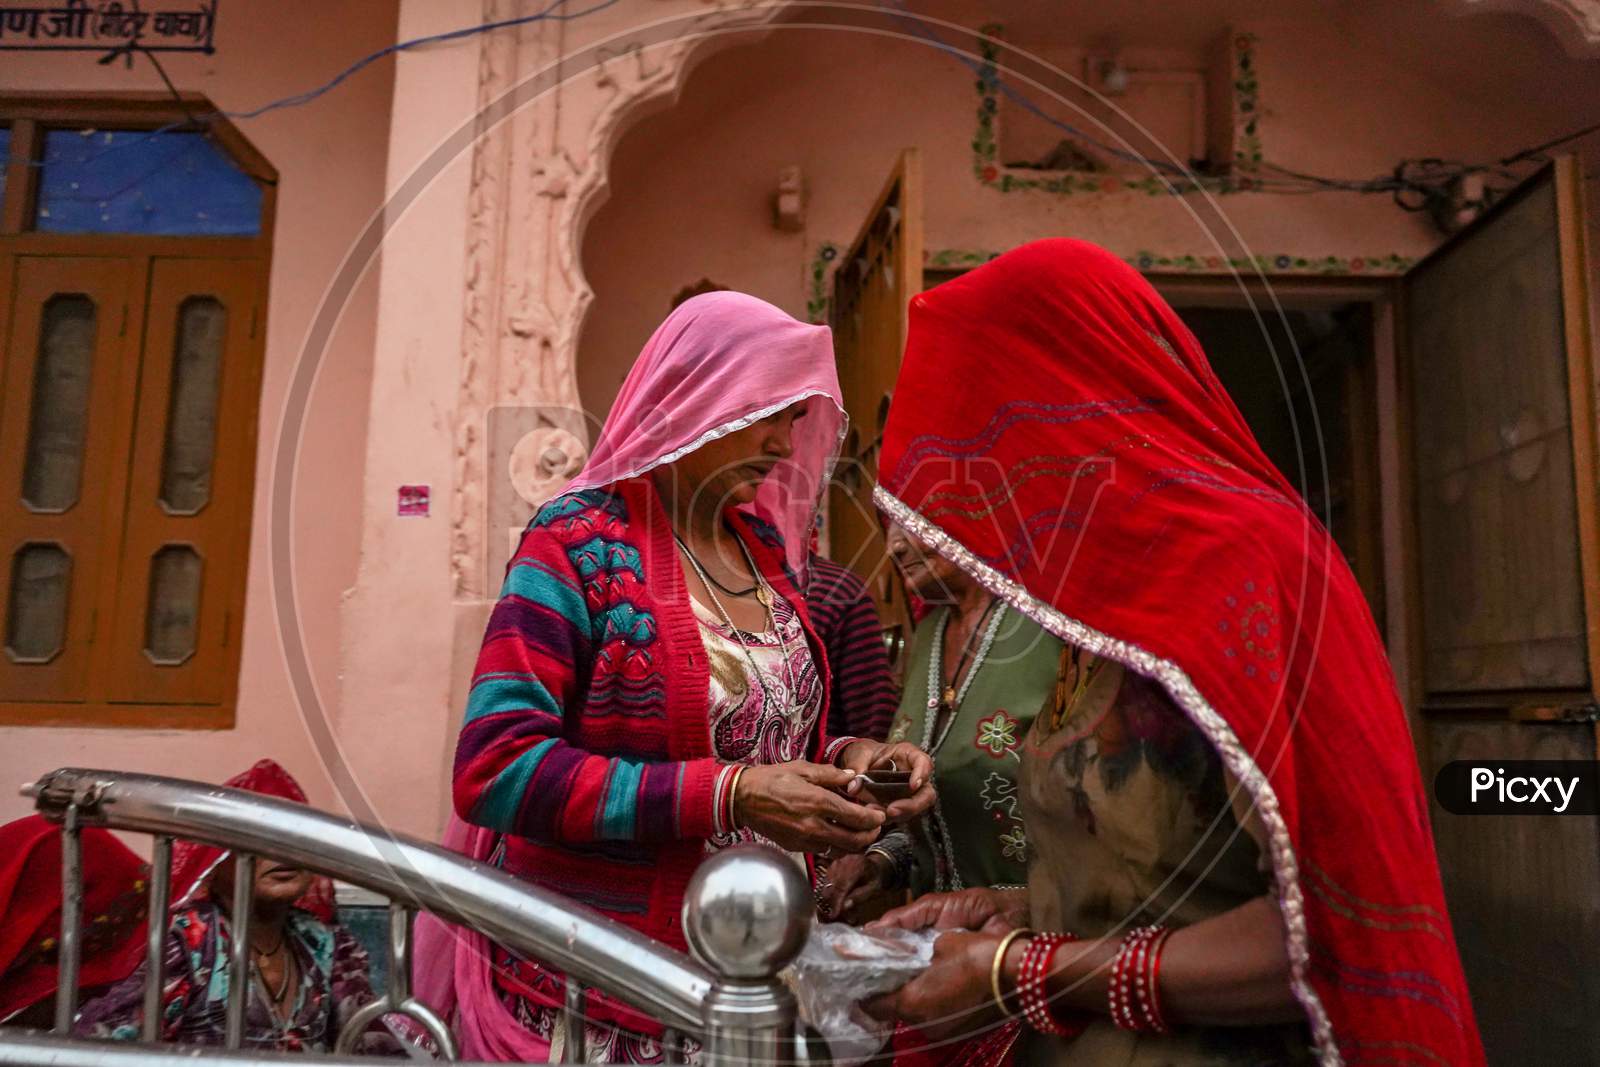 Pushkar, Rajasthan / India- June 5 2020 : Two Mid Aged Women In Veil Standing Near The Entrance Of Their Homes.